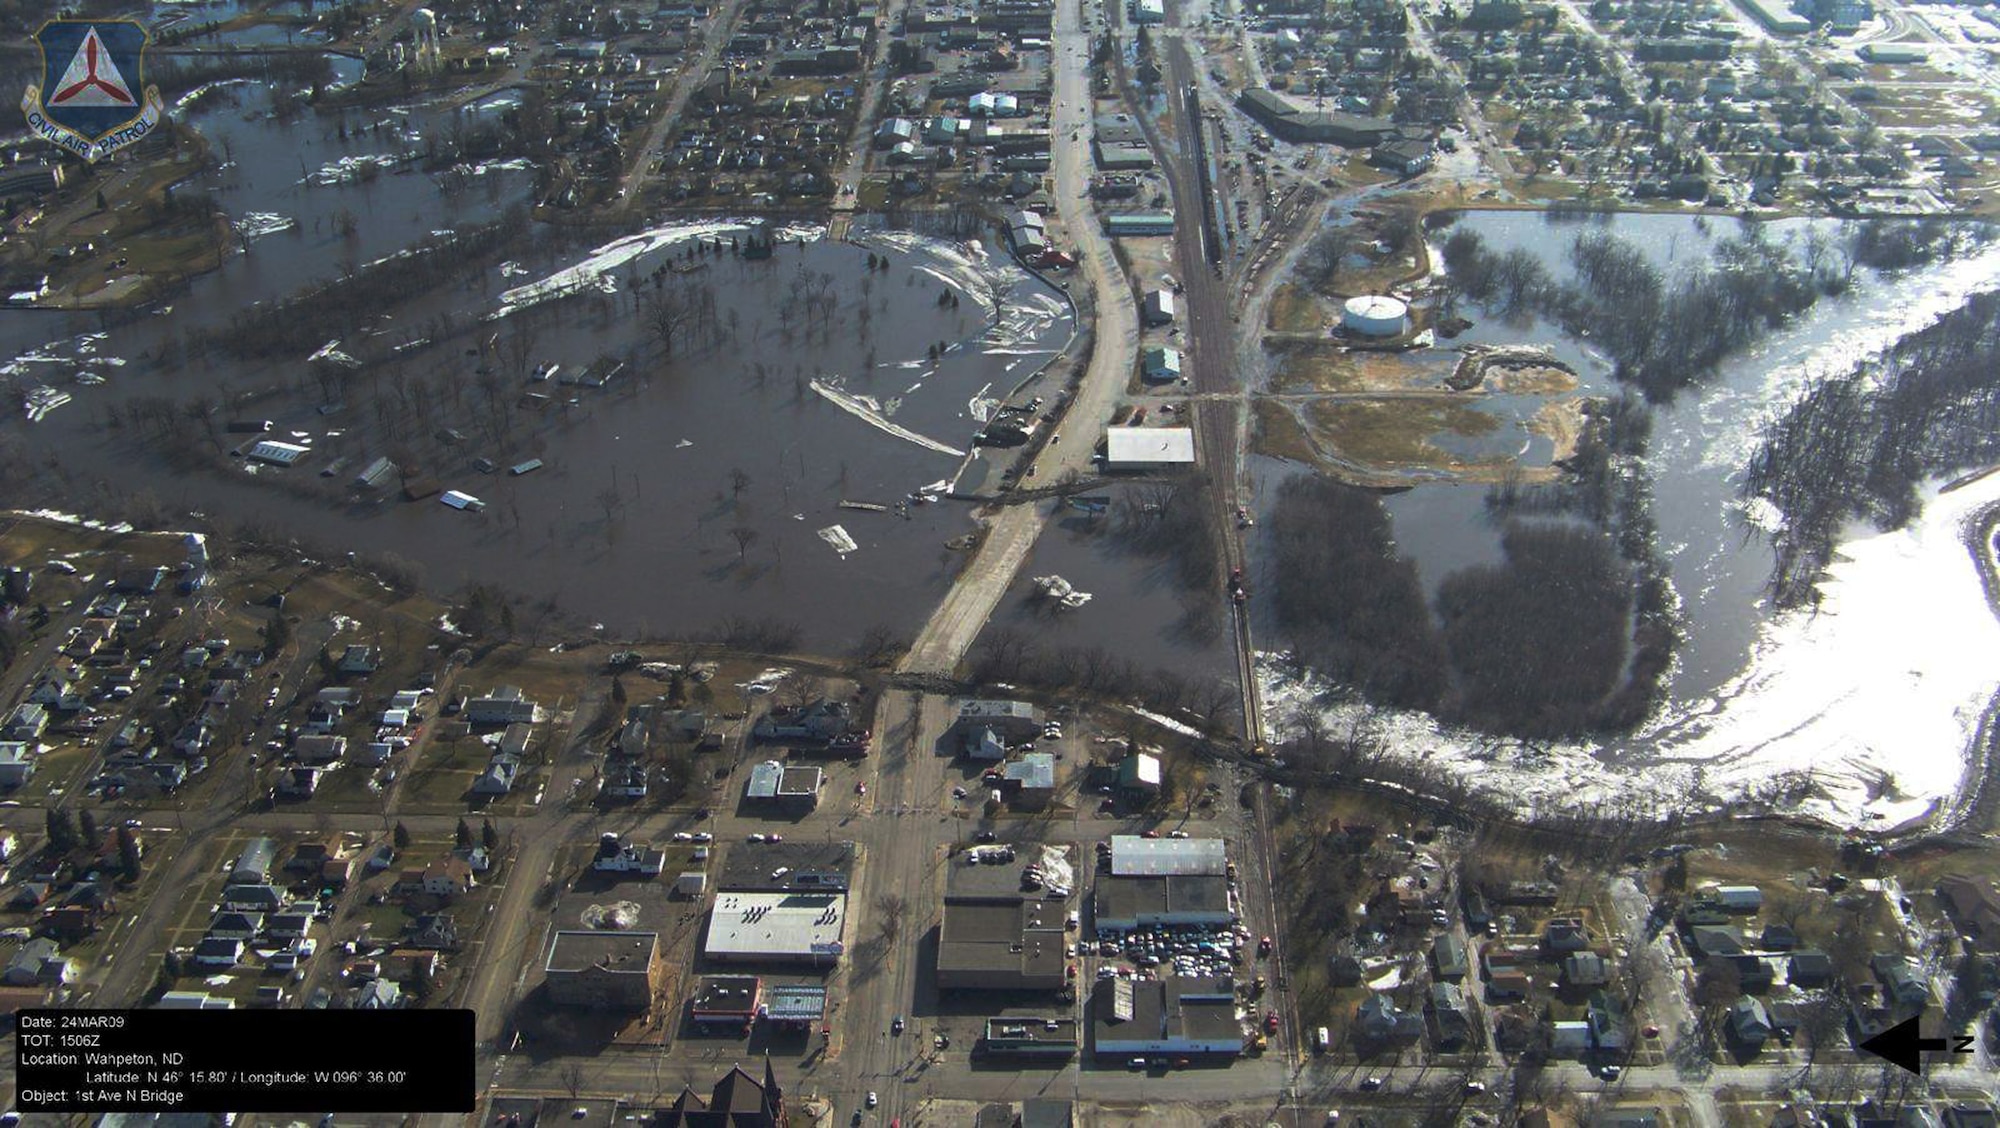 This visual image from Air Force Auxiliary officials show damage done by flood waters along the Red River in North Dakota. Air Force Auxiliary officials have flown more than 30 sorties and captured hundreds of visual images to give emergency responders and on-scene commanders the most up-to-date picture of the affected areas. (U.S. Air Force photo)
